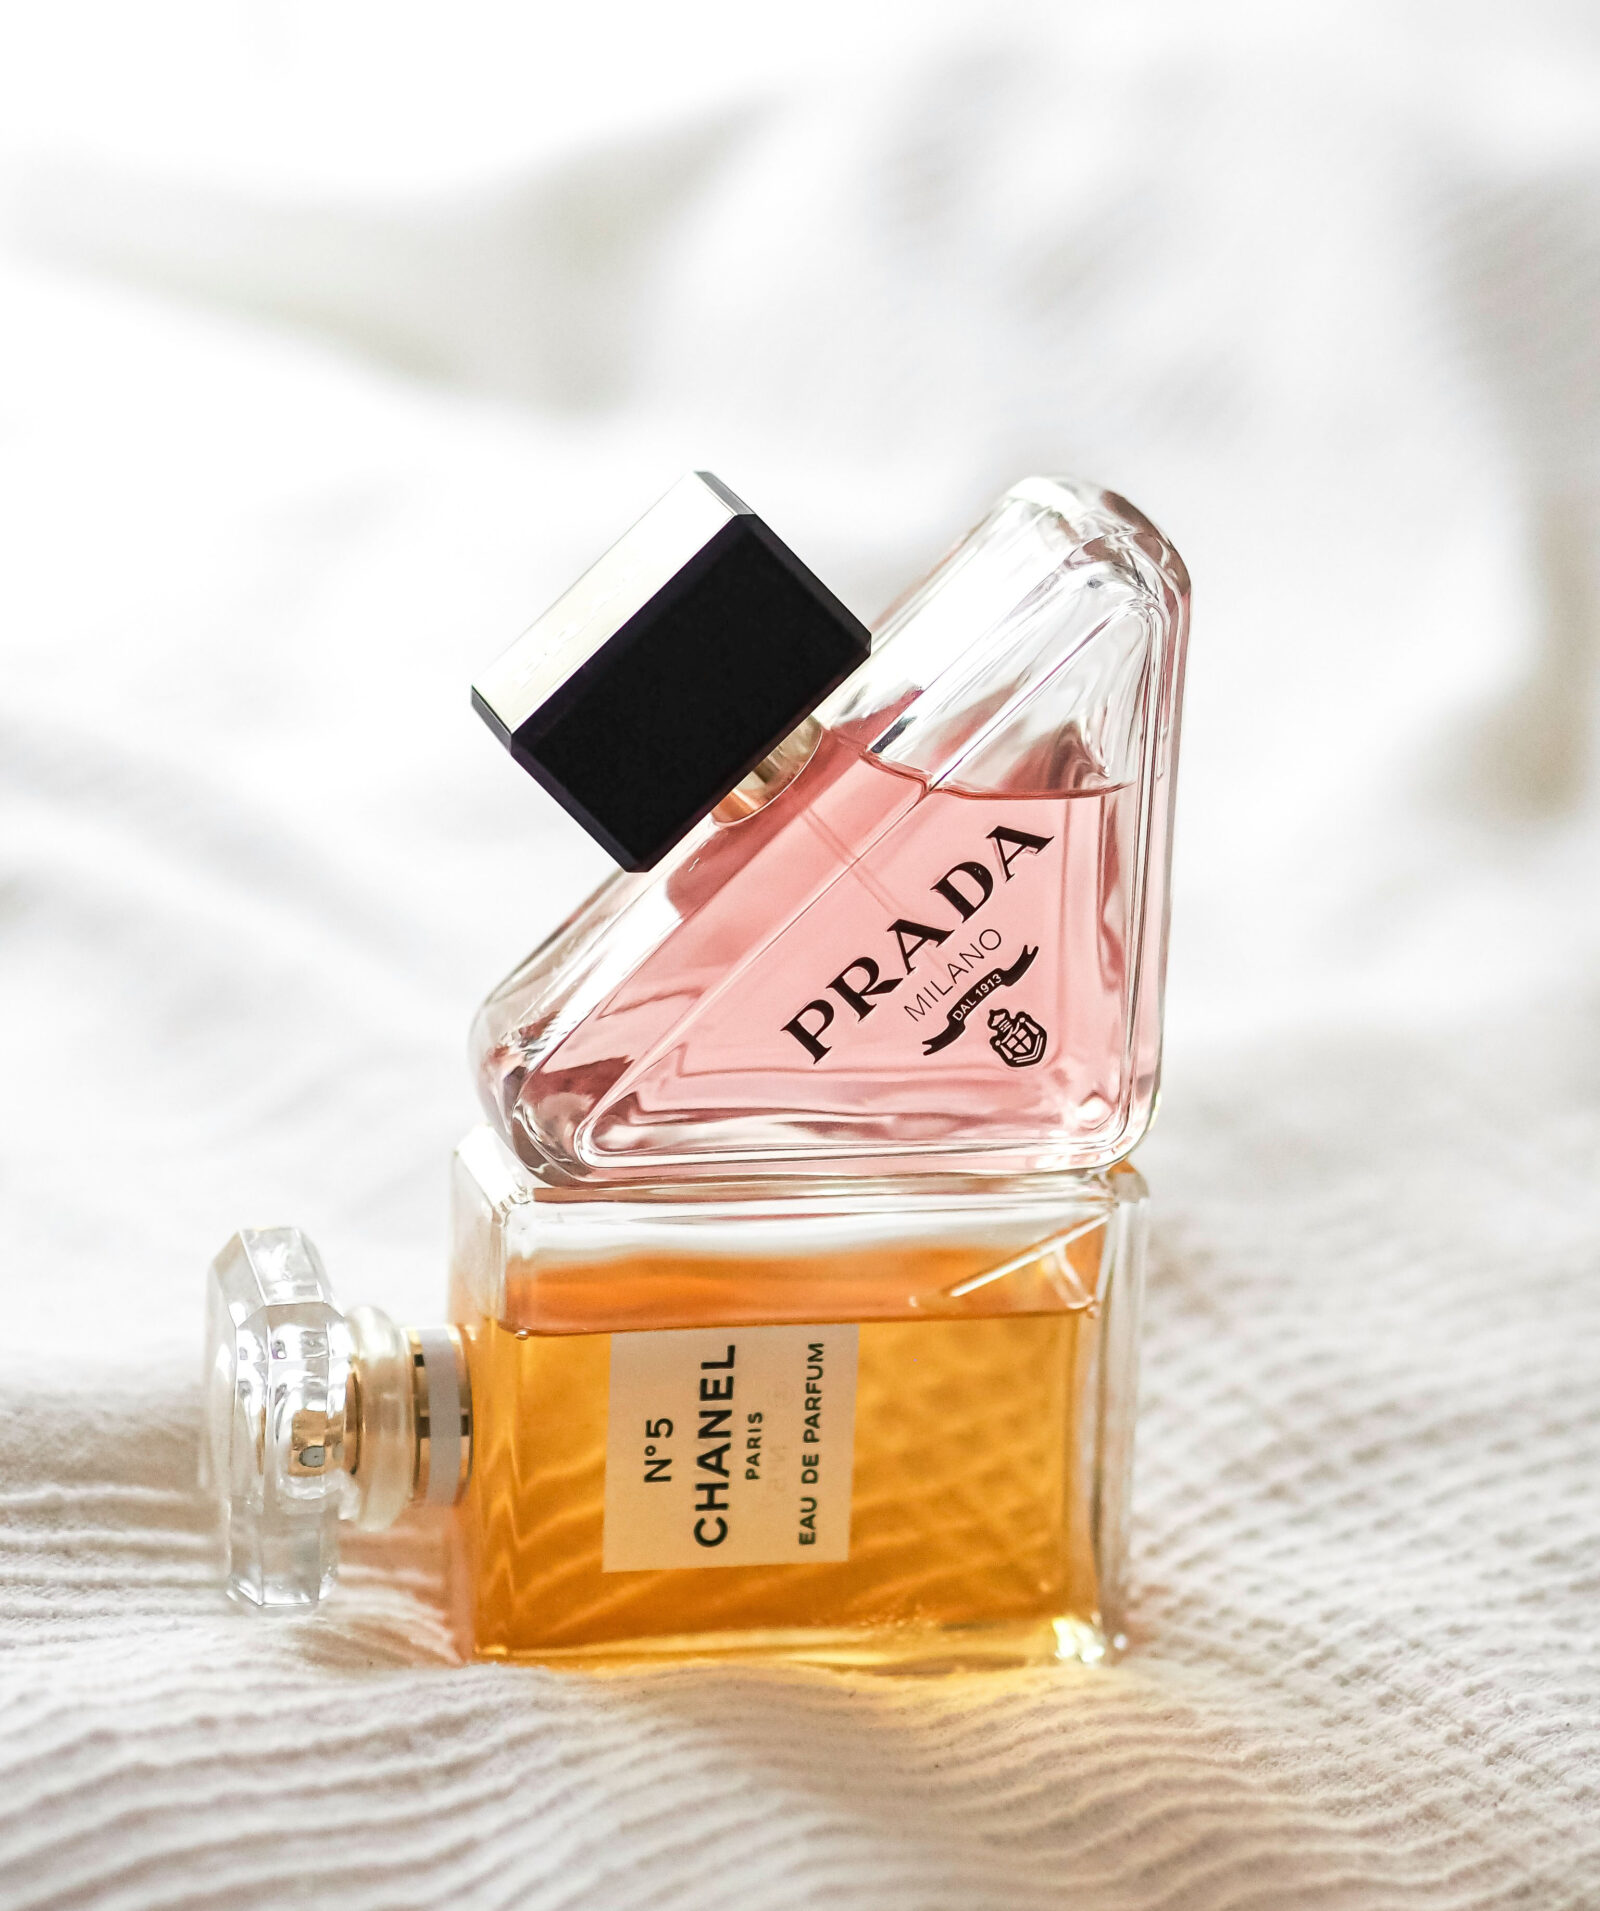 prada paradoxe is one of the top fragrances 